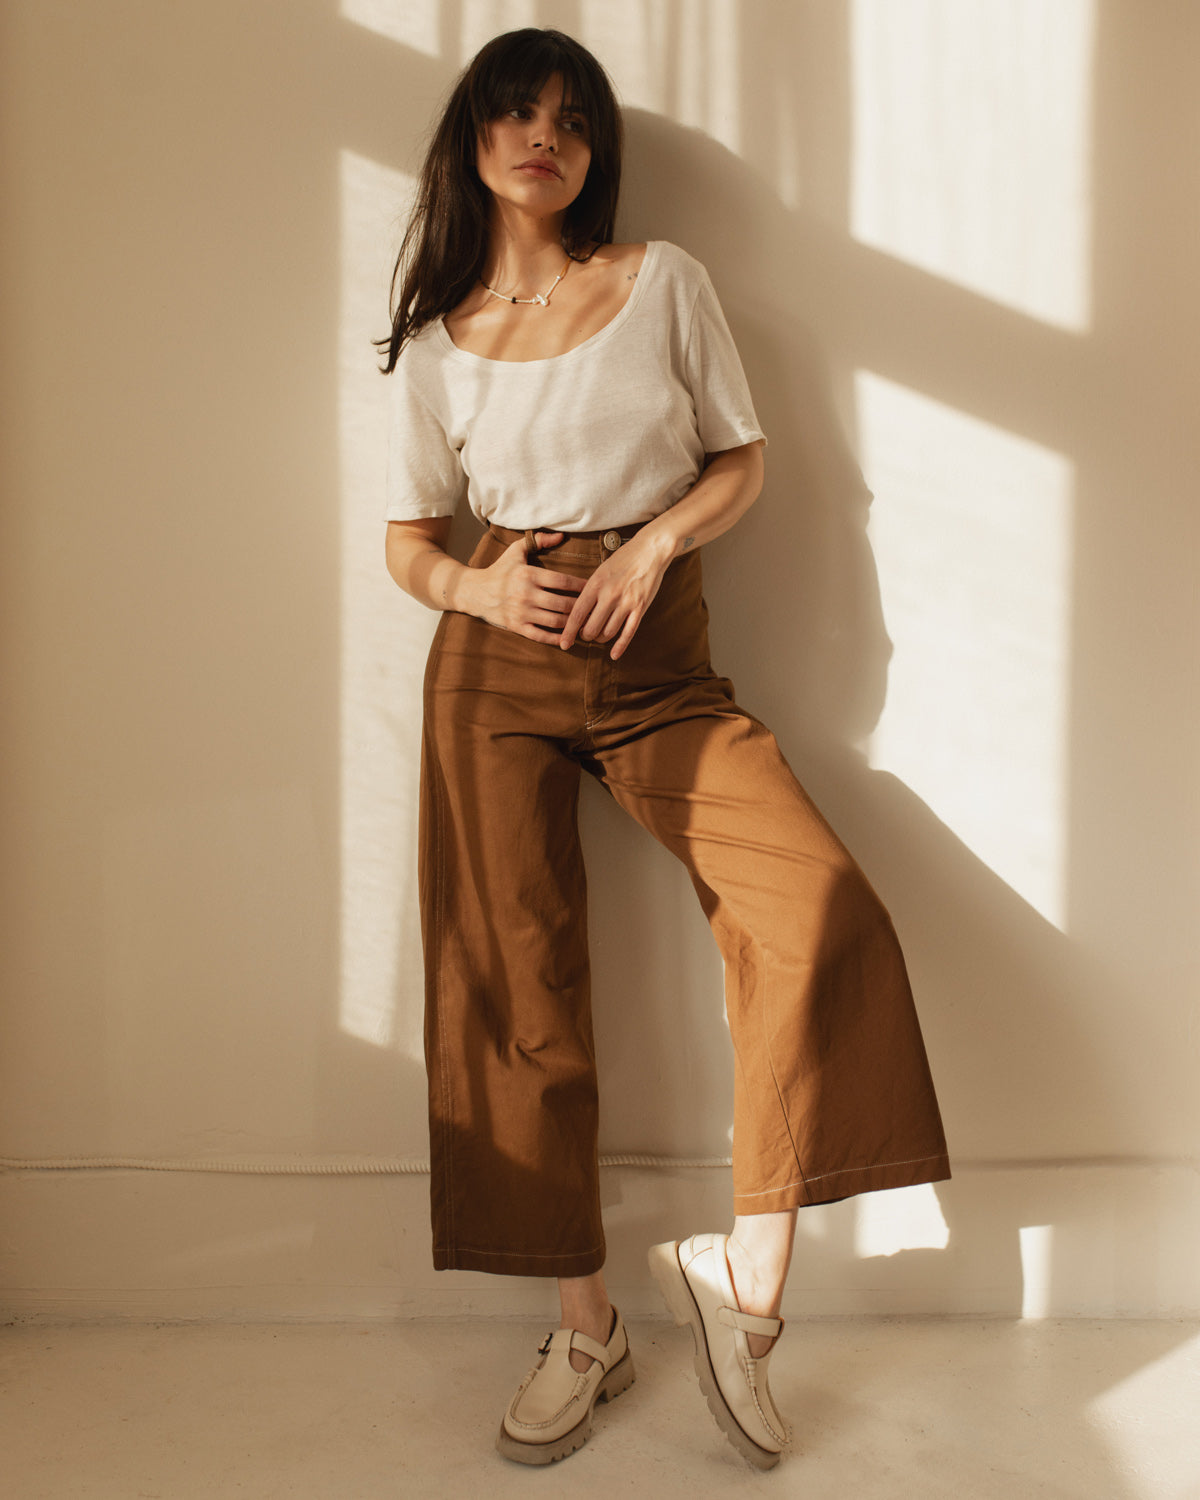 high-waisted wide leg pants in brown